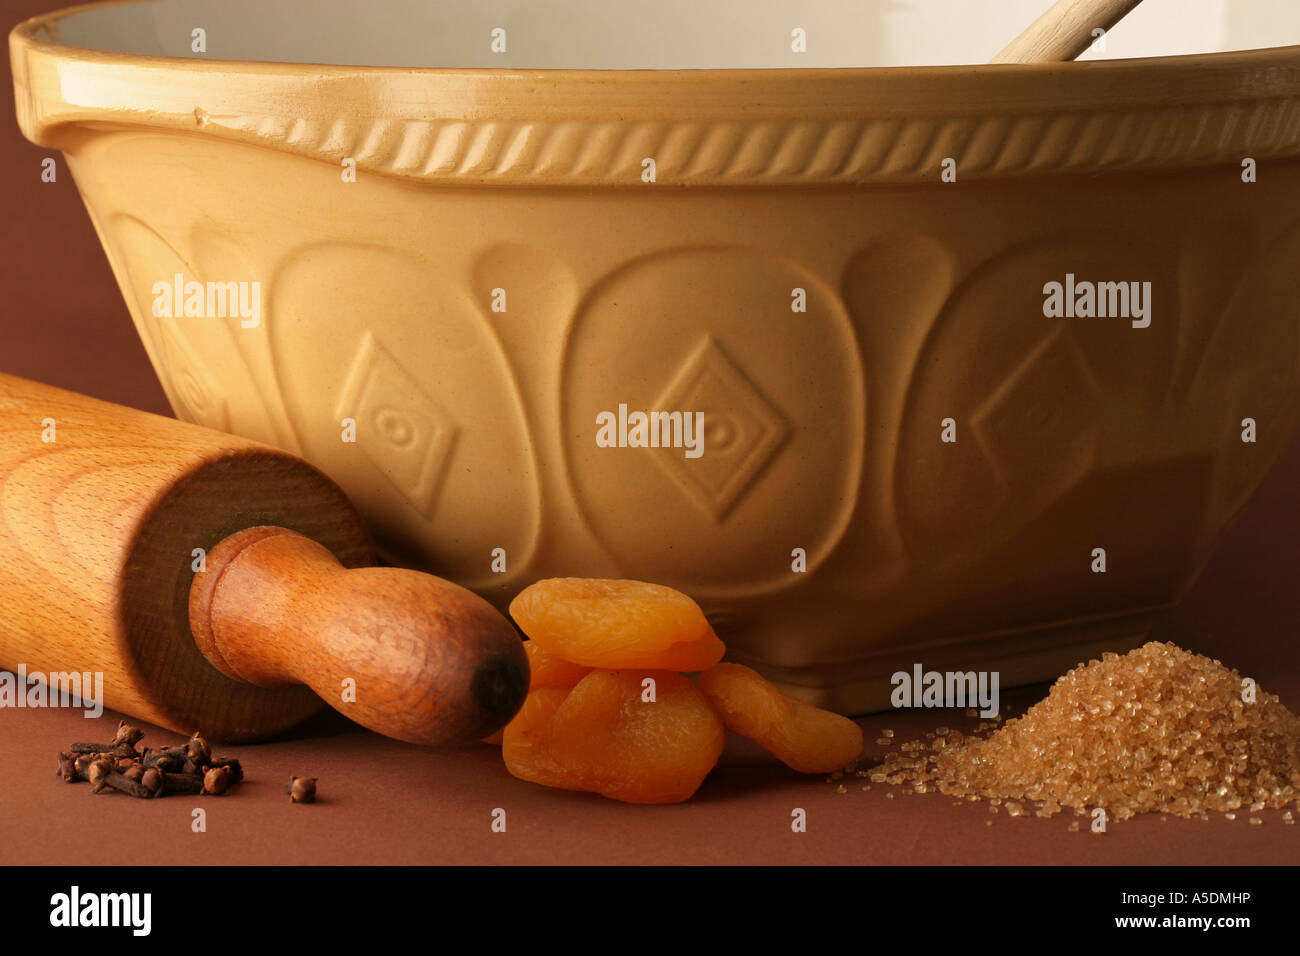 A Mixing Bowl, Rolling Pin and dried ingredients Stock Photo